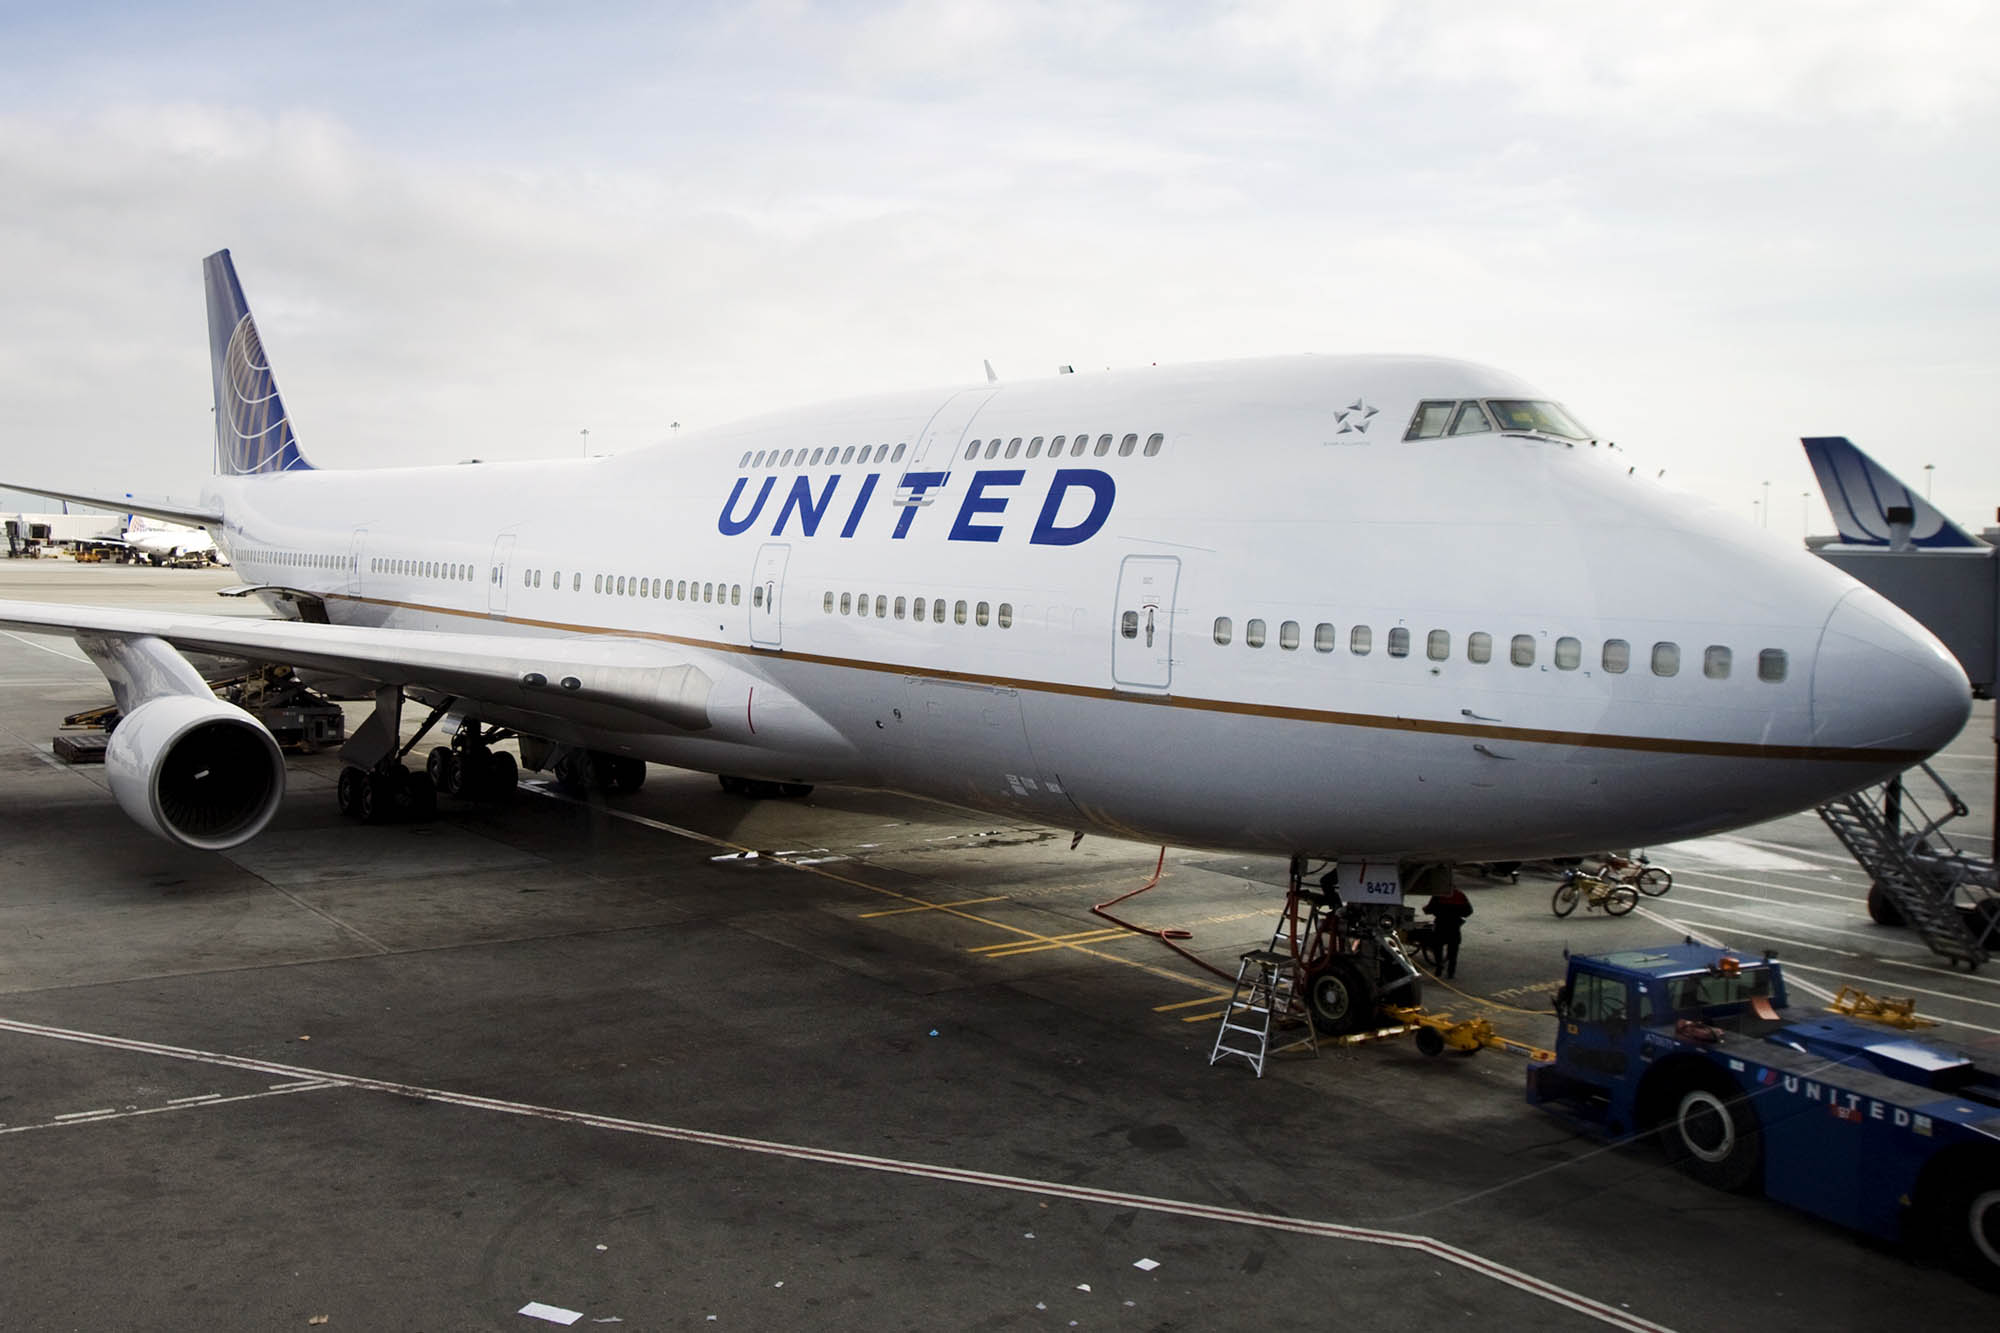 United Continental's new 747 sits on the tamarac before taking off from San Francisco's International Airport in San Francisco, CA, on Wednesday, February 23, 2011. Kim White/Bloomberg News
